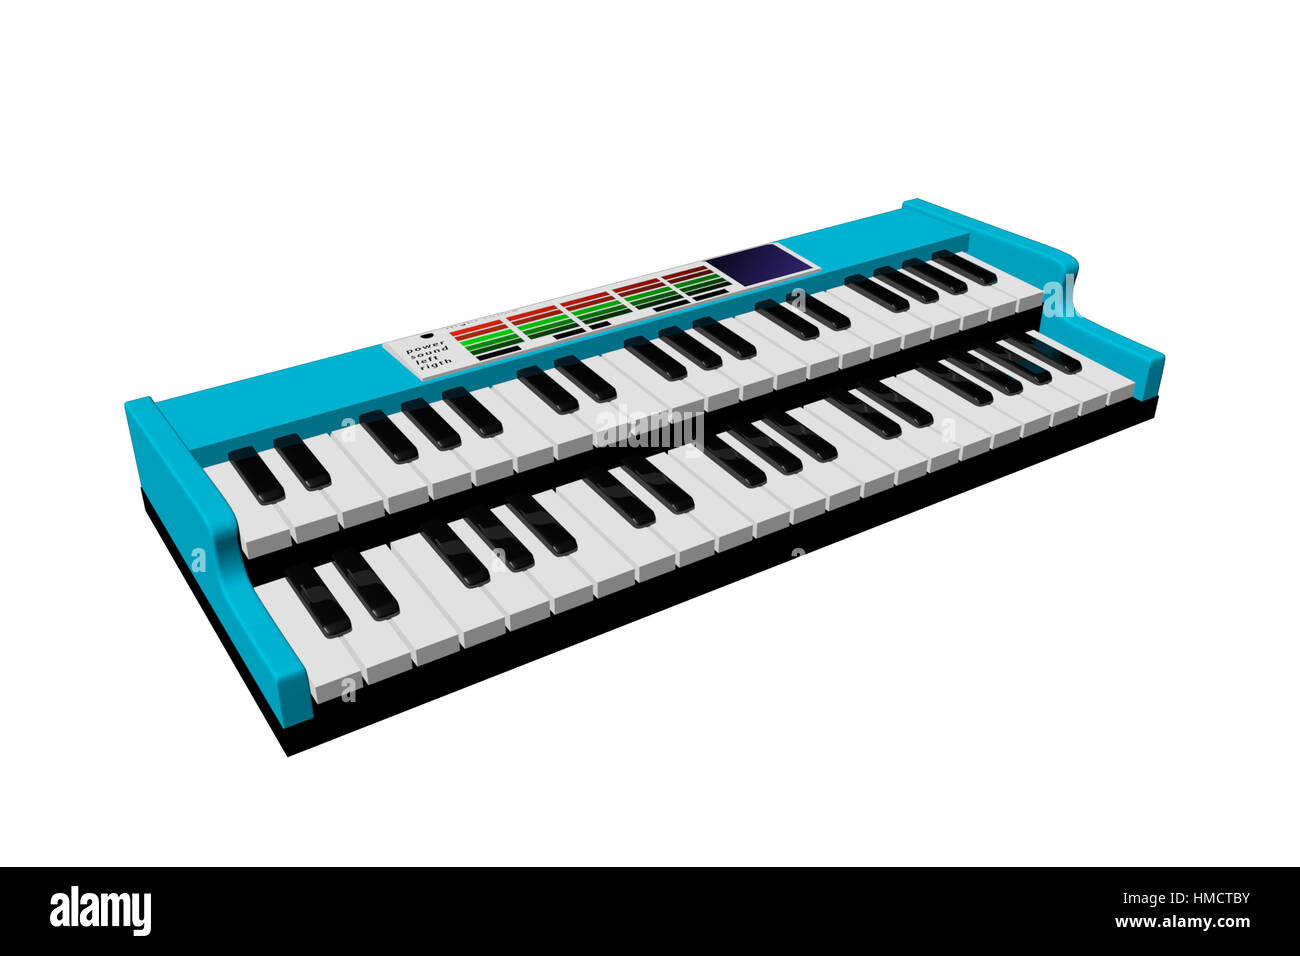 illustration of a small musical instrument with white and black keys covered in blue on the outside musical piano Stock Photo